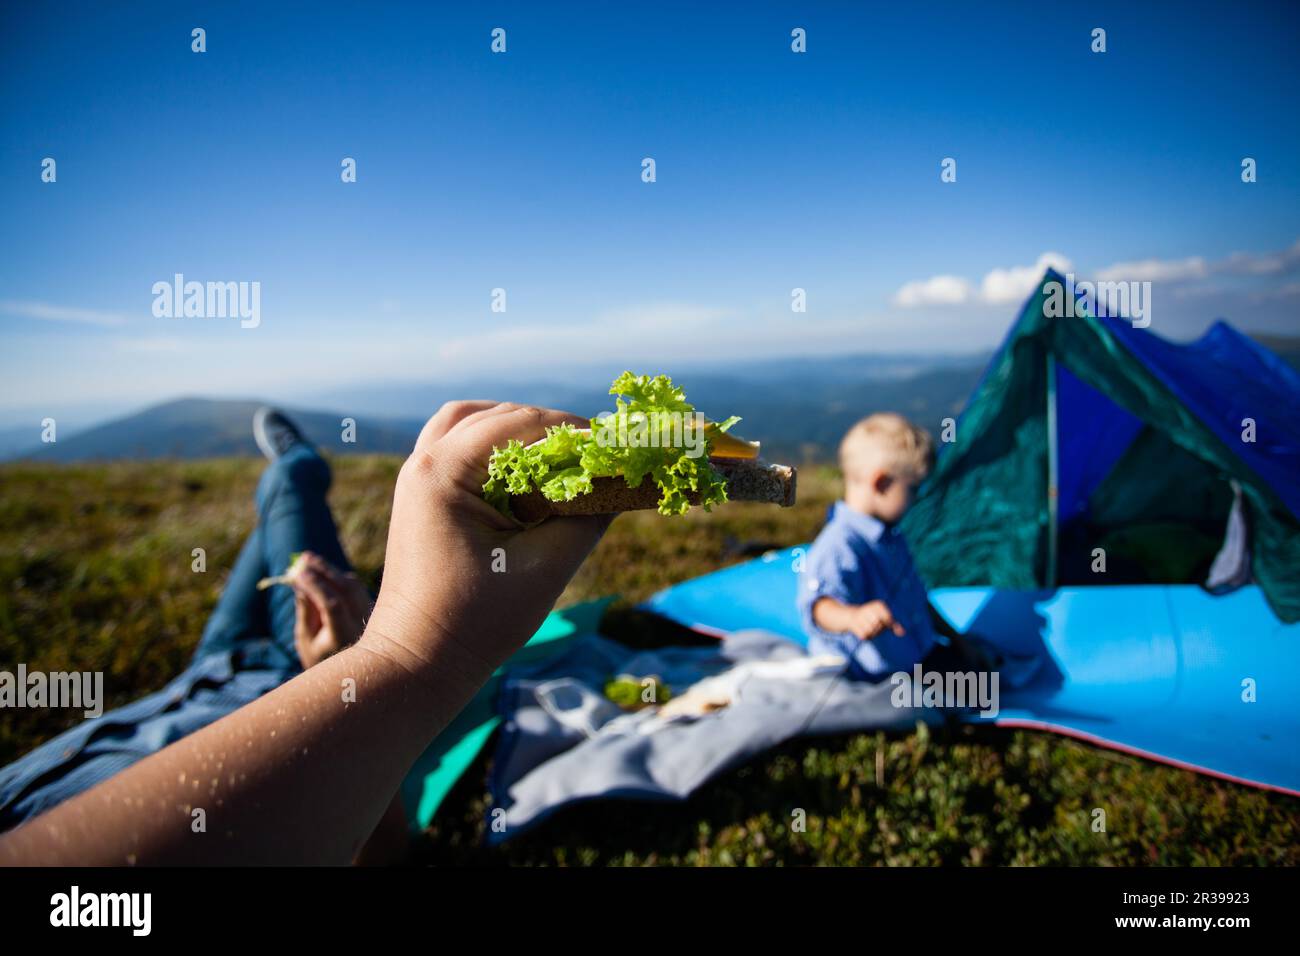 Family snacking at nature. Tasty sandwich with lettuce over sky background. Stock Photo